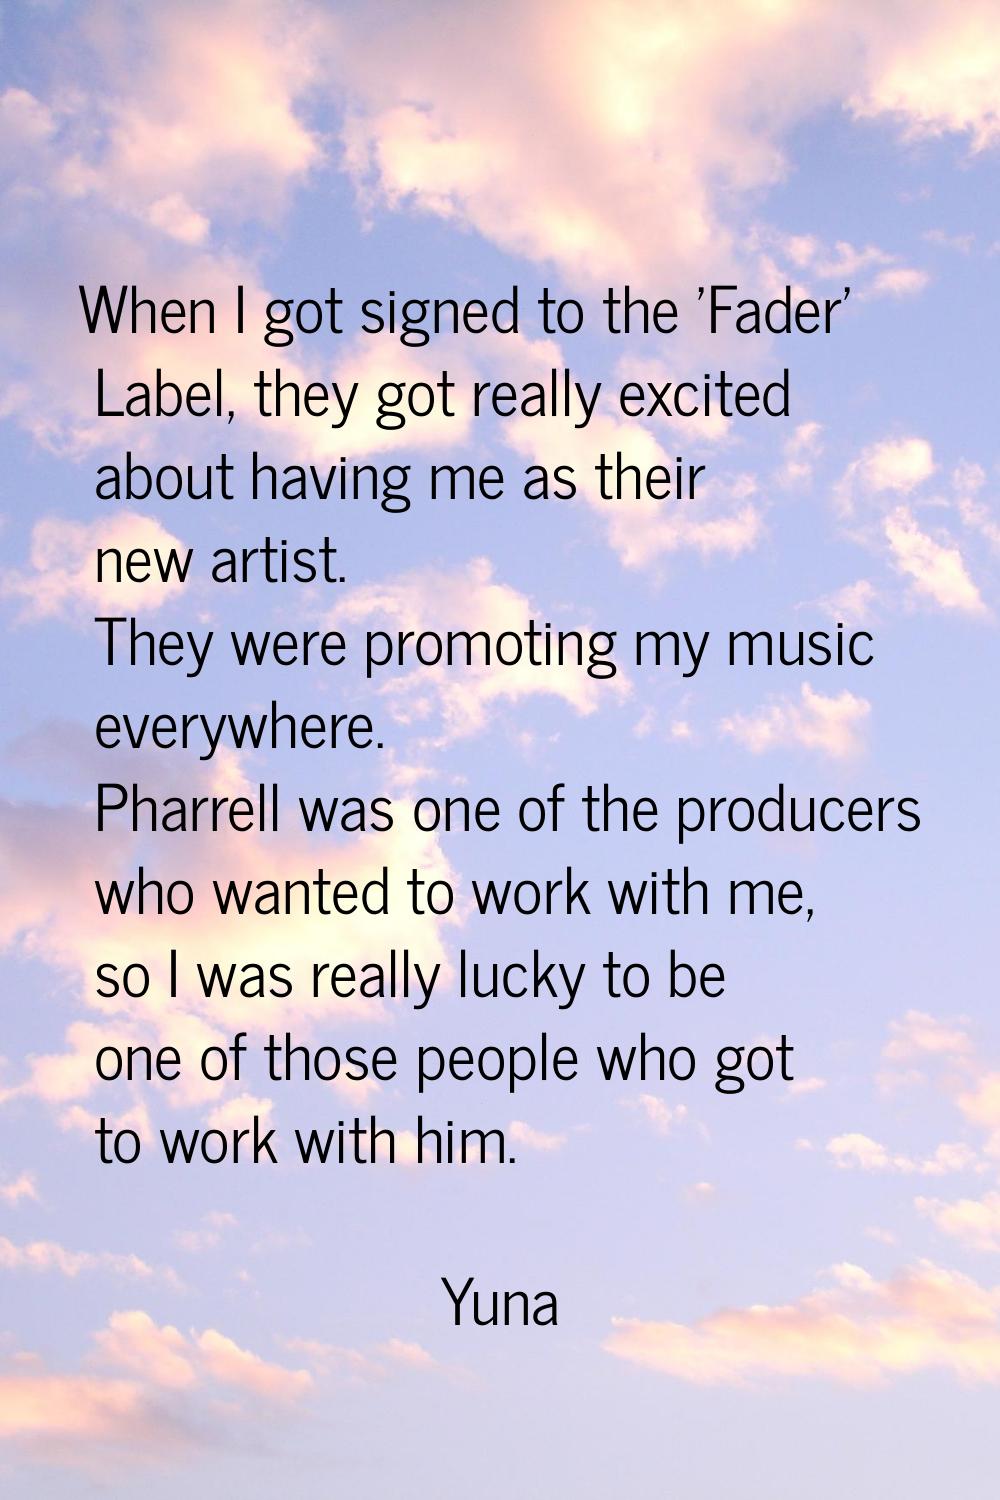 When I got signed to the 'Fader' Label, they got really excited about having me as their new artist